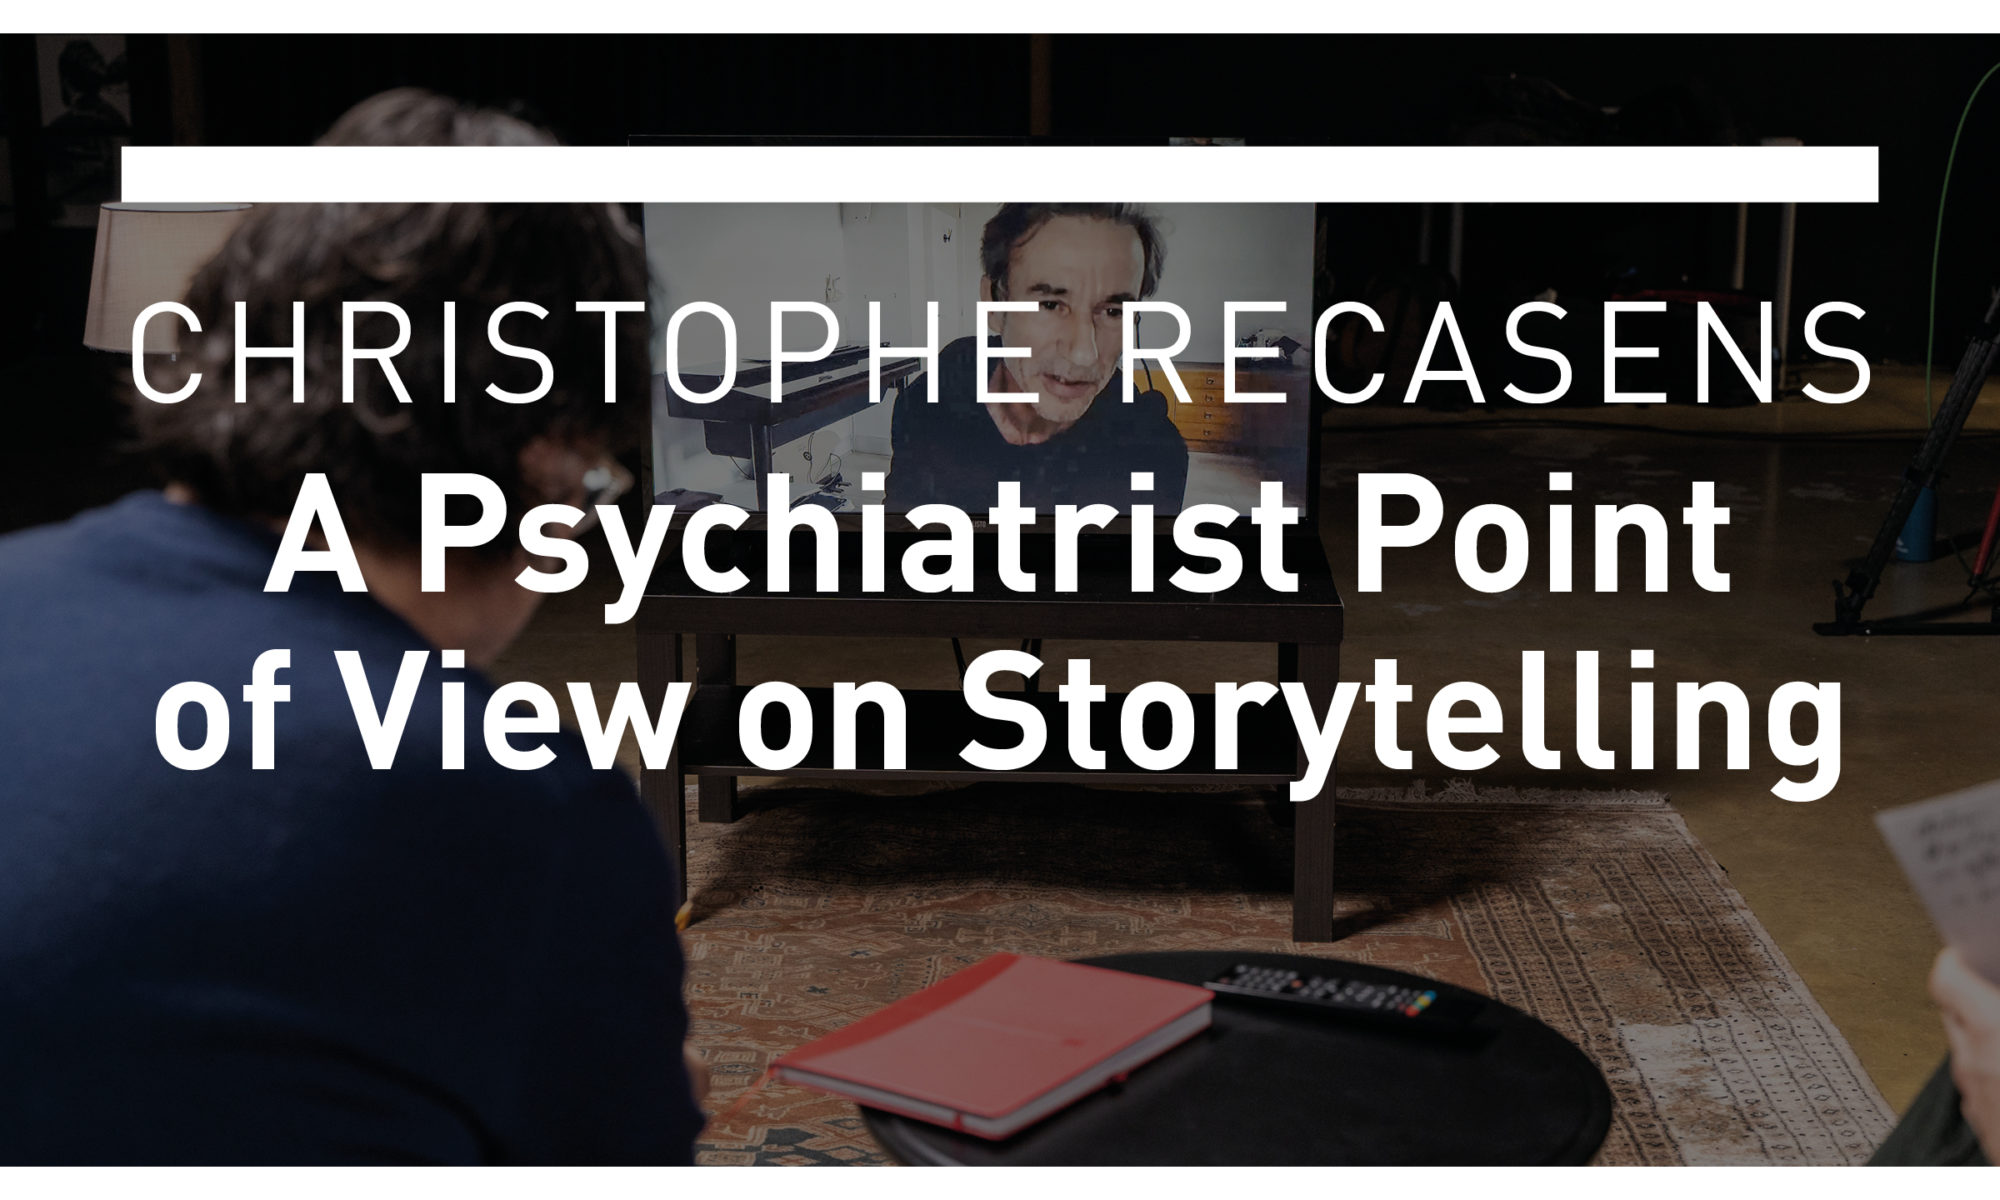 A Psychiatrist point of view on Storytelling, by Christophe Recasens